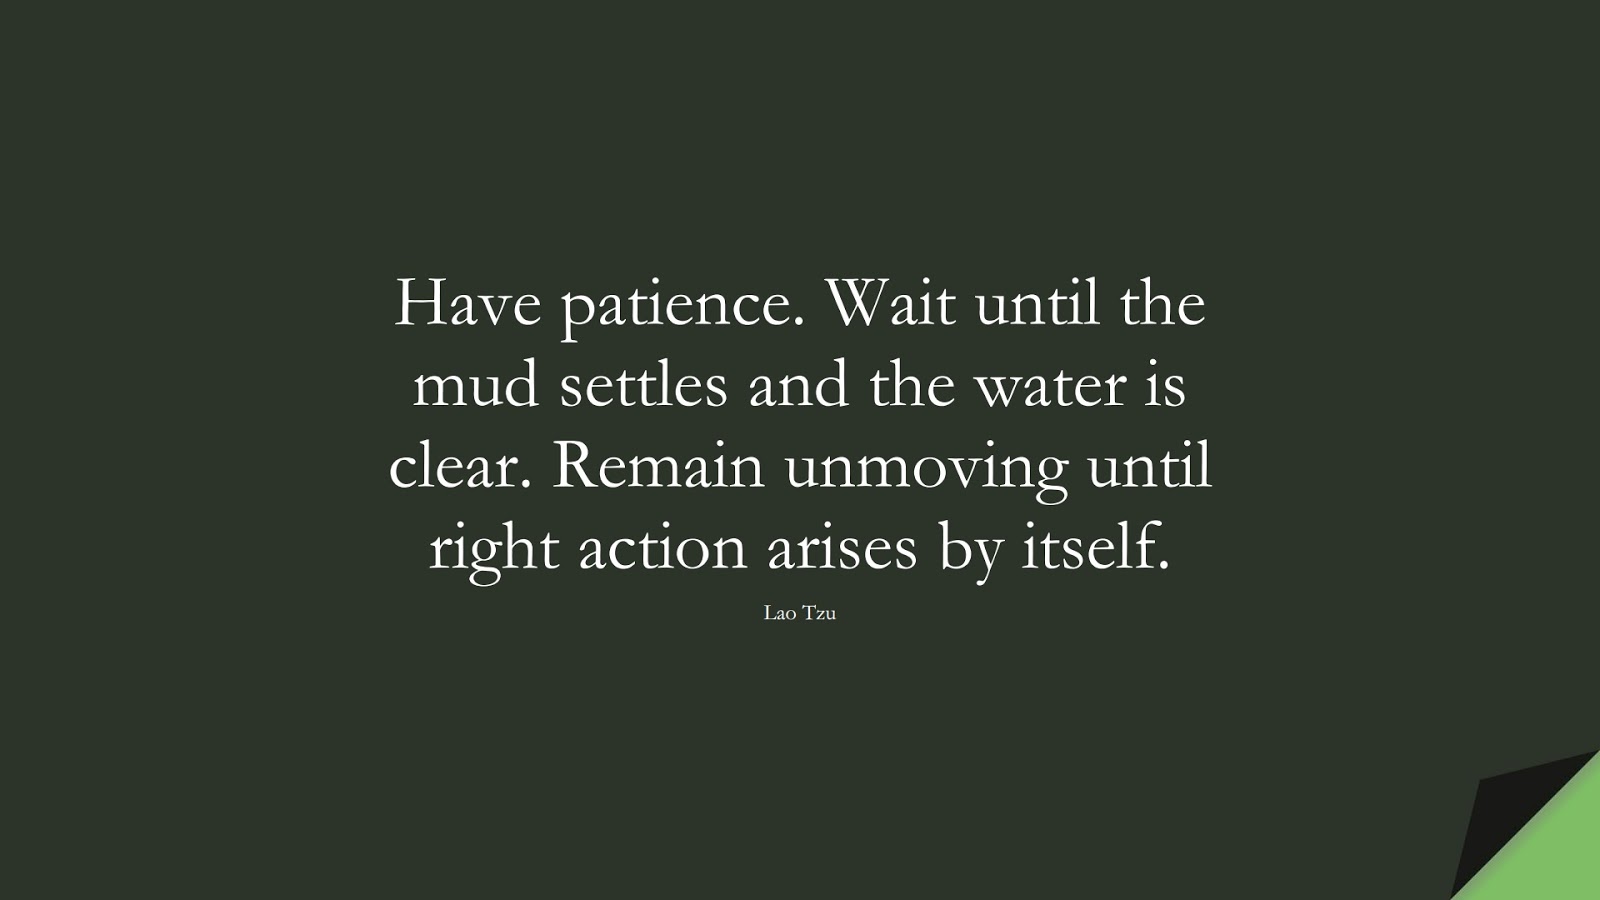 Have patience. Wait until the mud settles and the water is clear. Remain unmoving until right action arises by itself. (Lao Tzu);  #EncouragingQuotes